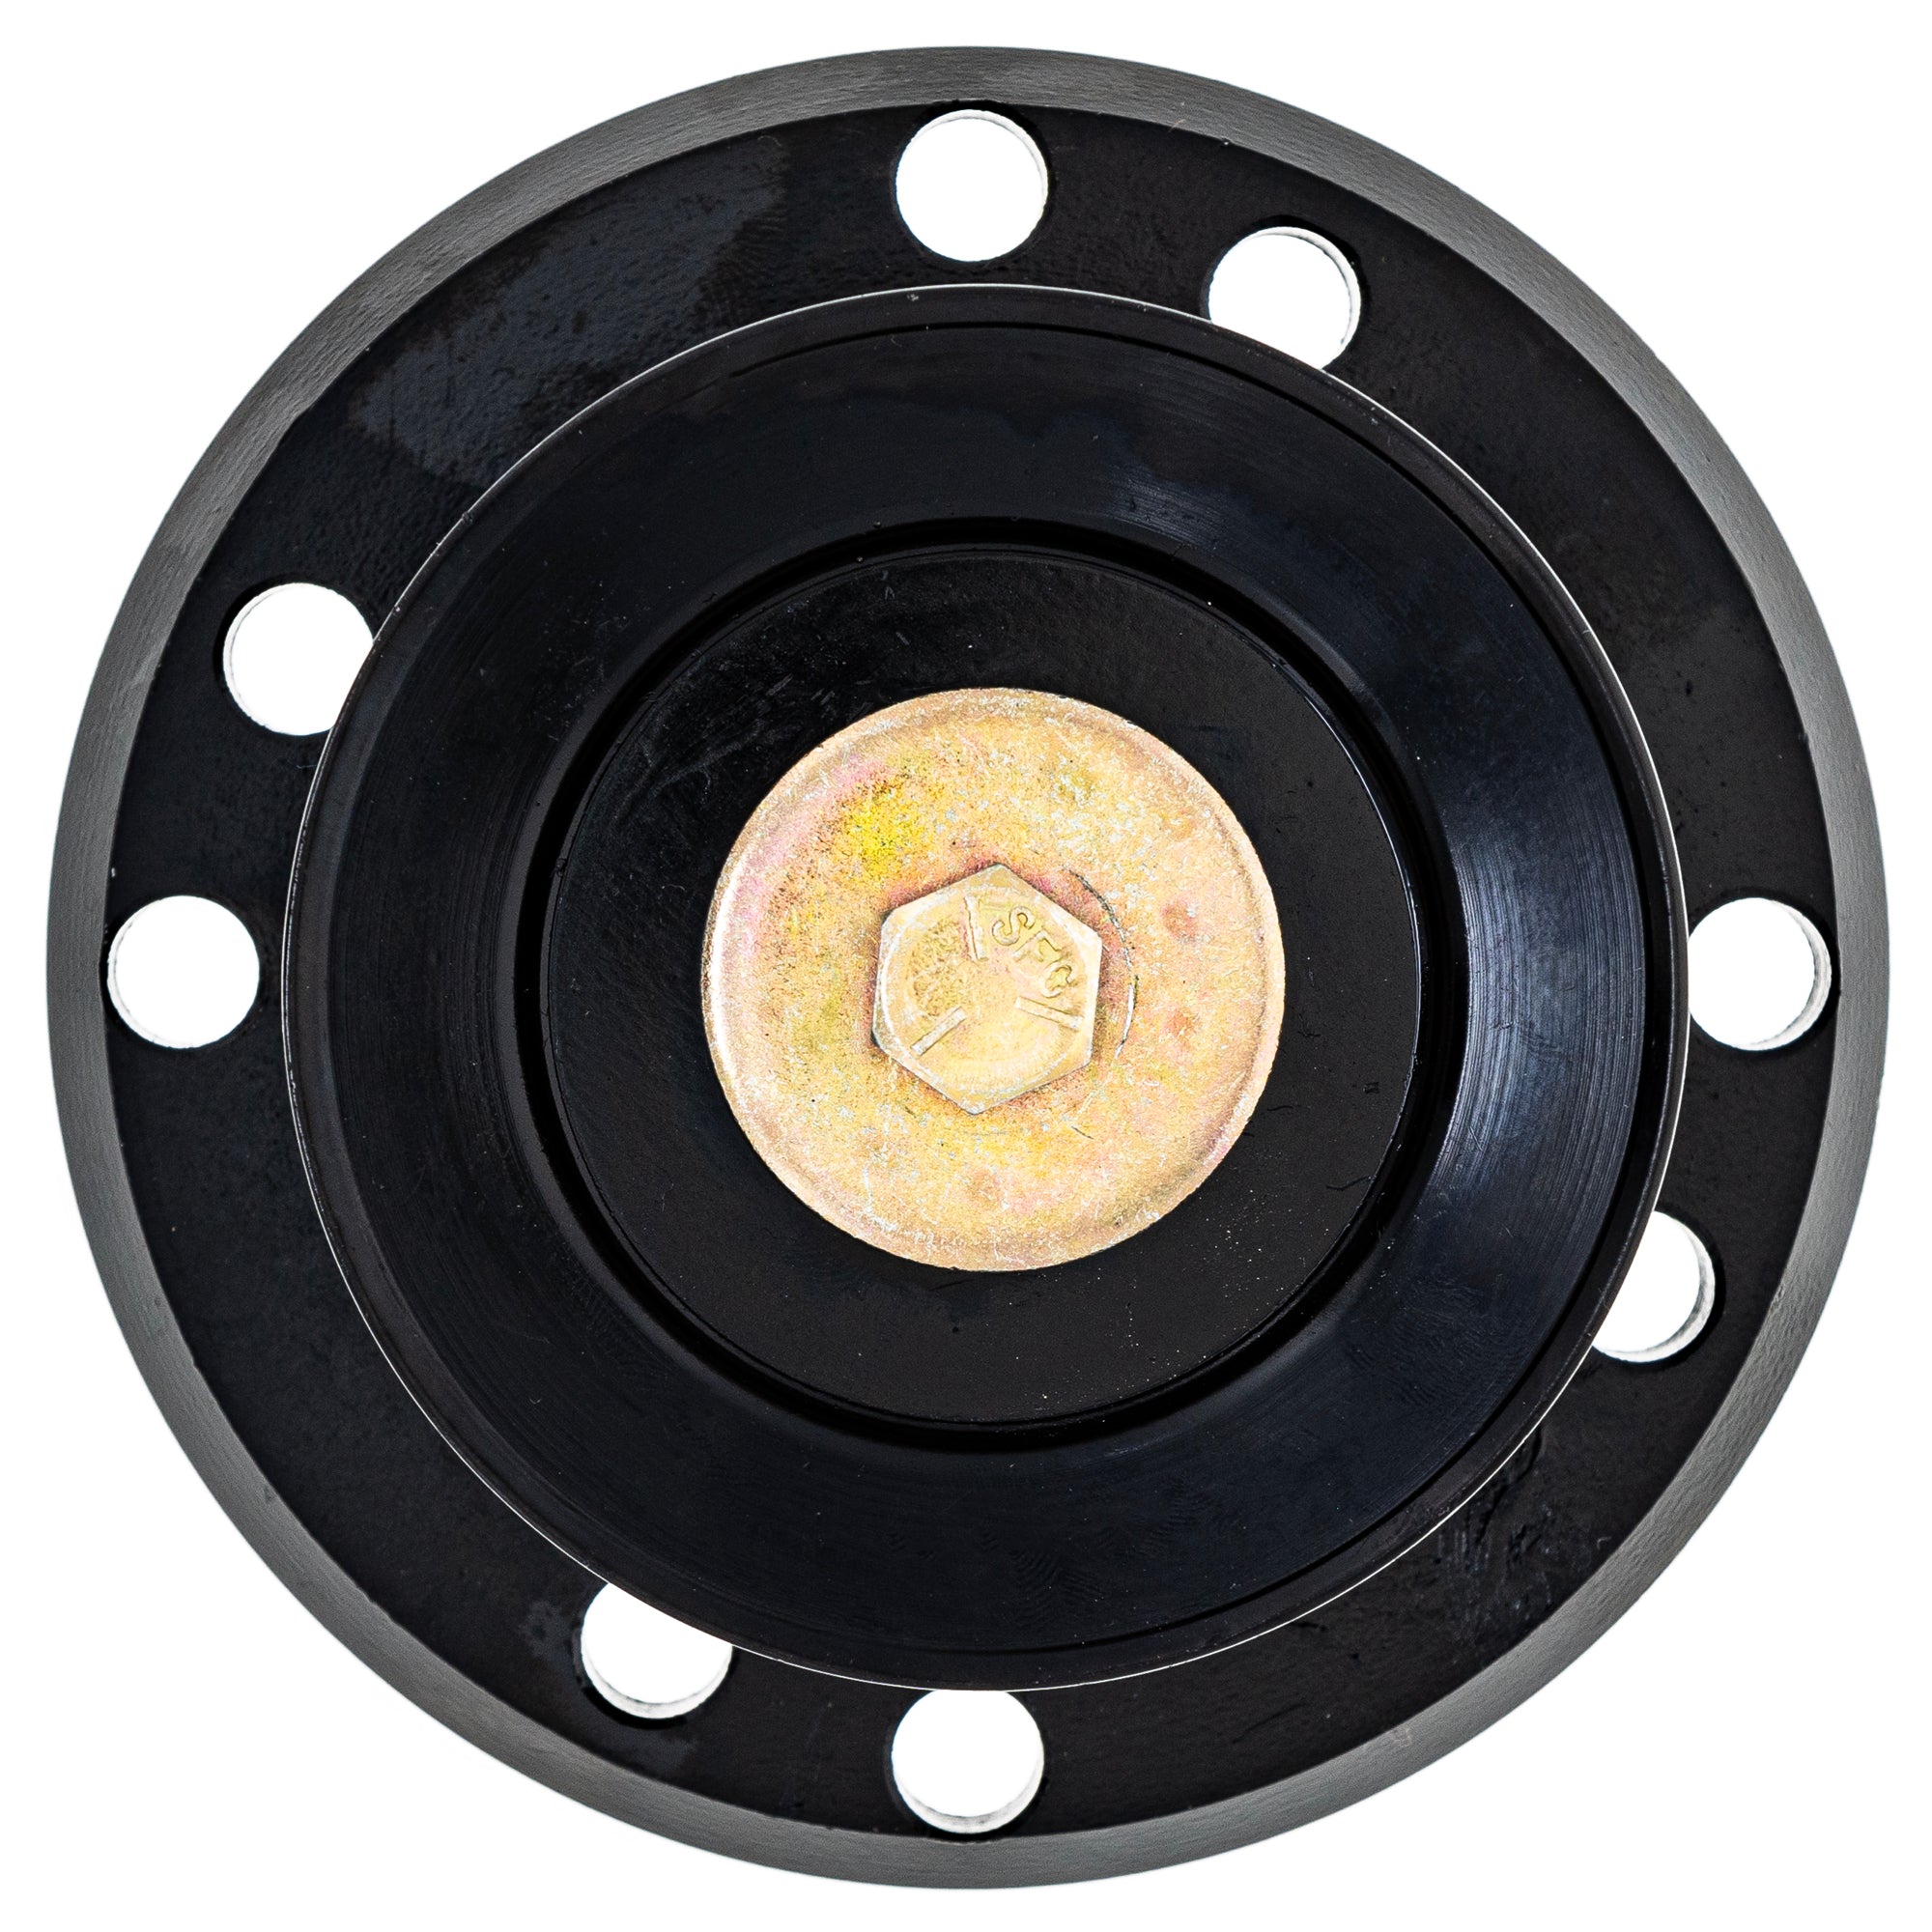 Mower Spindle for Gravely Pro Master 300 50 021306 043366 34 50-Inch Deck